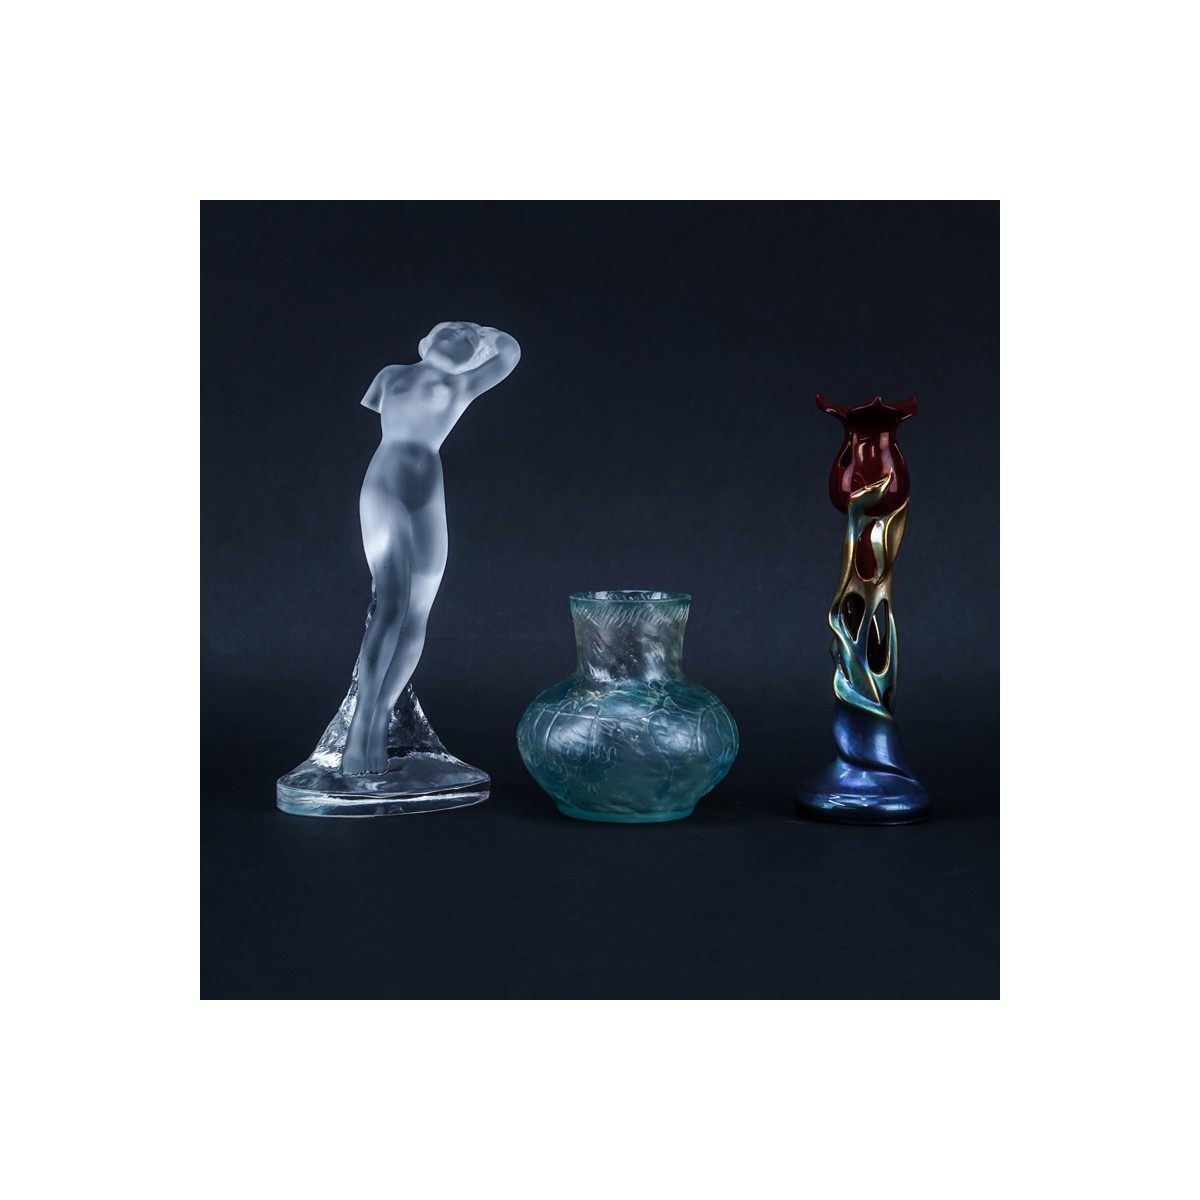 Group of Three (3): Lalique Nude Figurine, Zsolnay Eosin Tulip Pottery Candlestick, and Cameo Glass Vase. All signed appropriately.